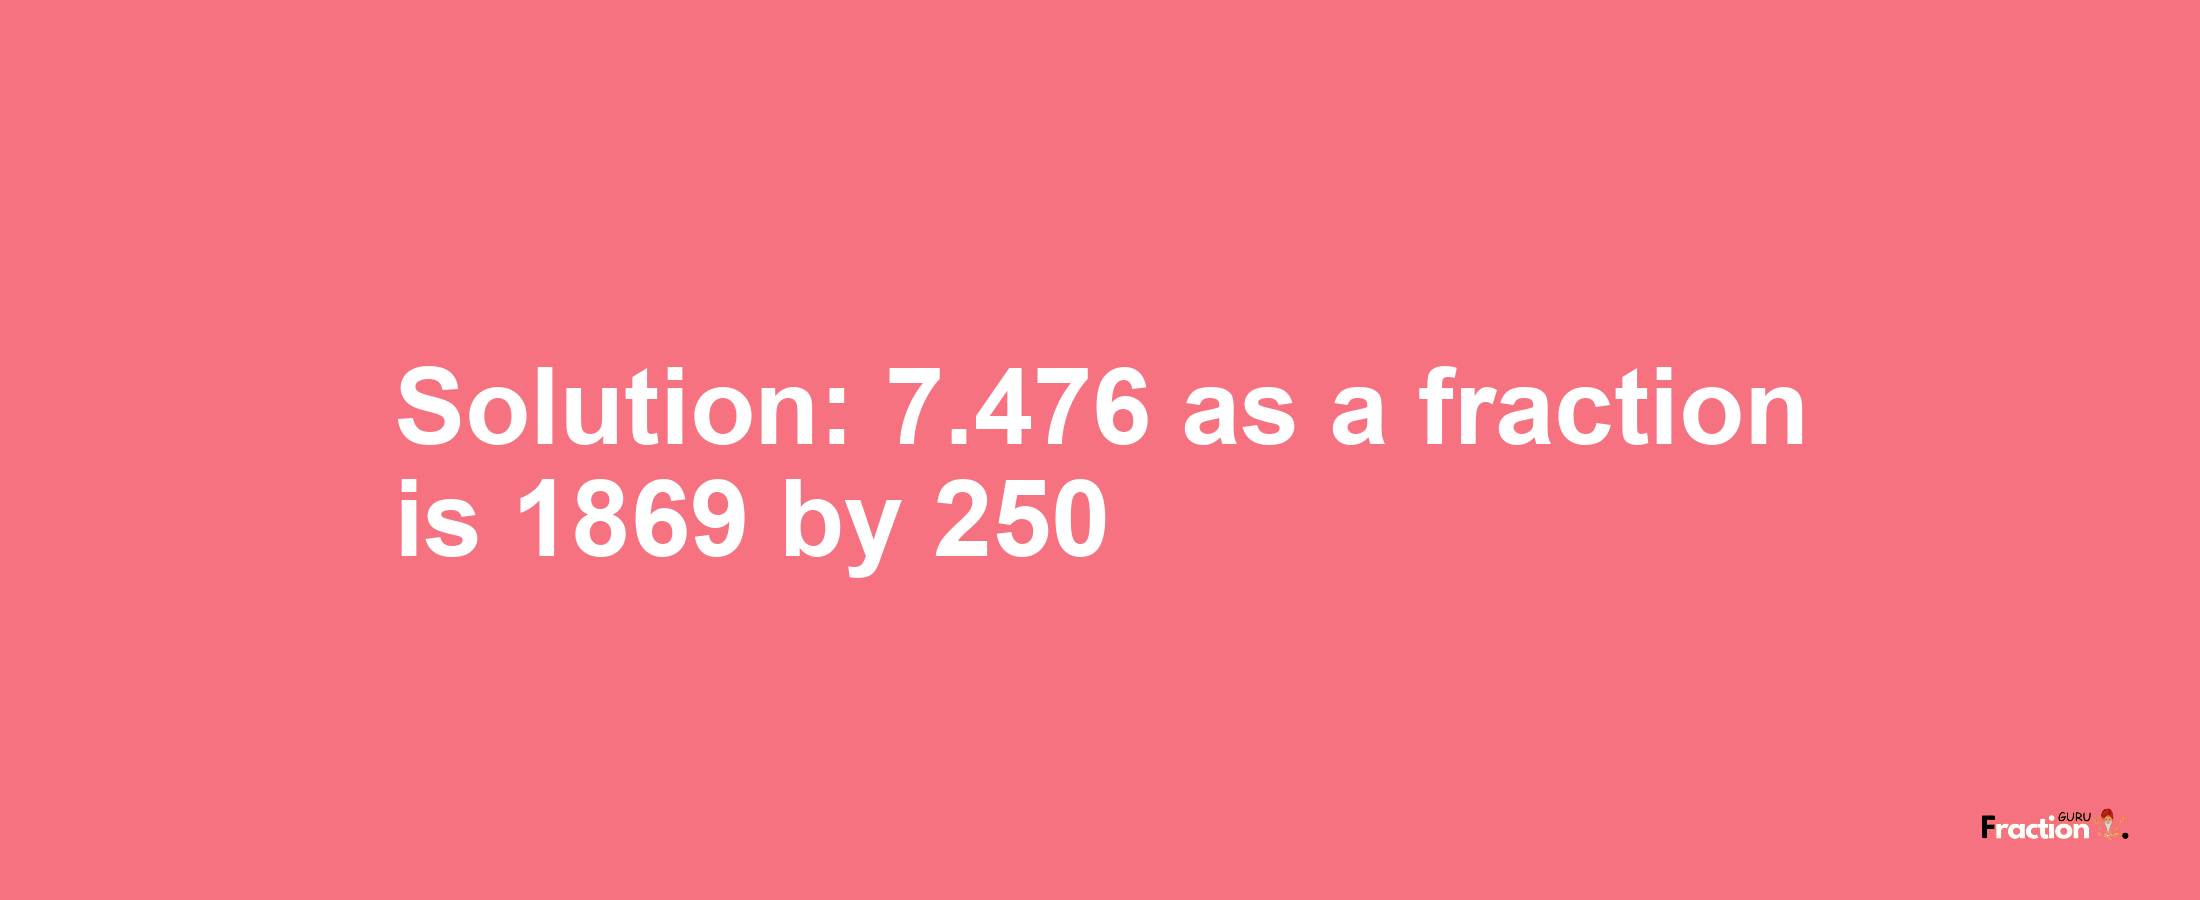 Solution:7.476 as a fraction is 1869/250